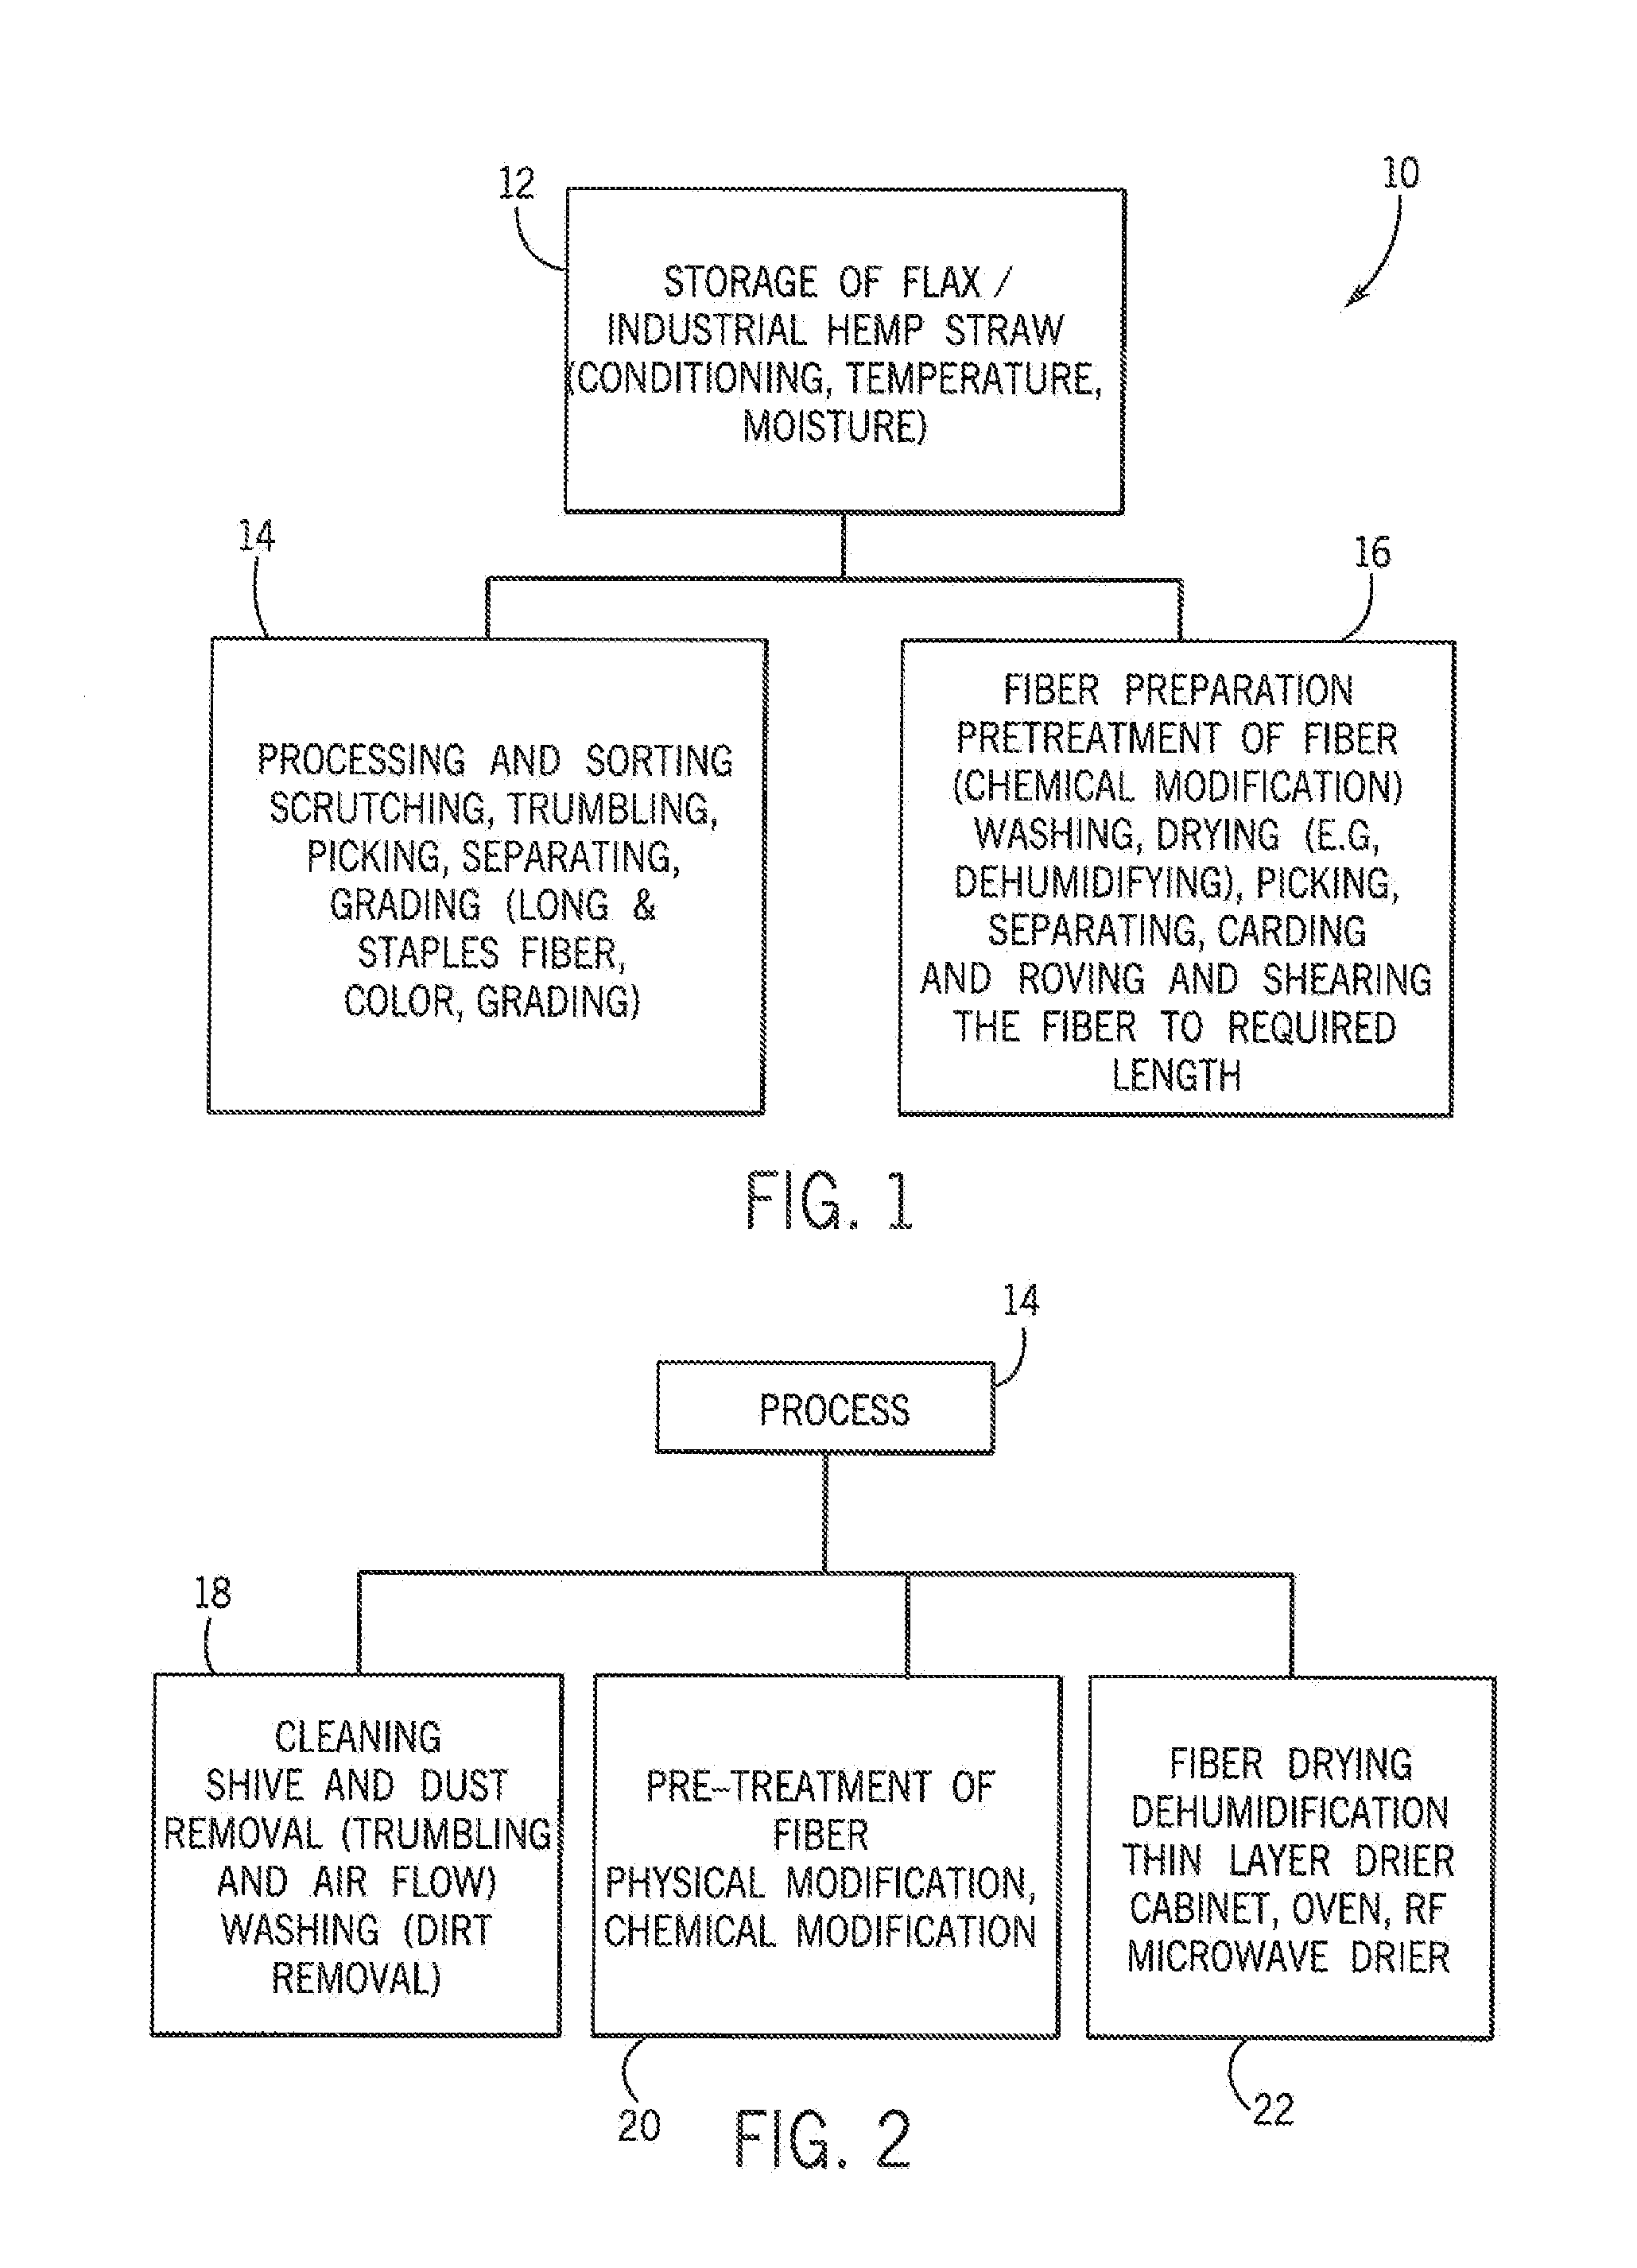 Method To Process Oilseed Flax Fiber For Use In Biocomposite Materials